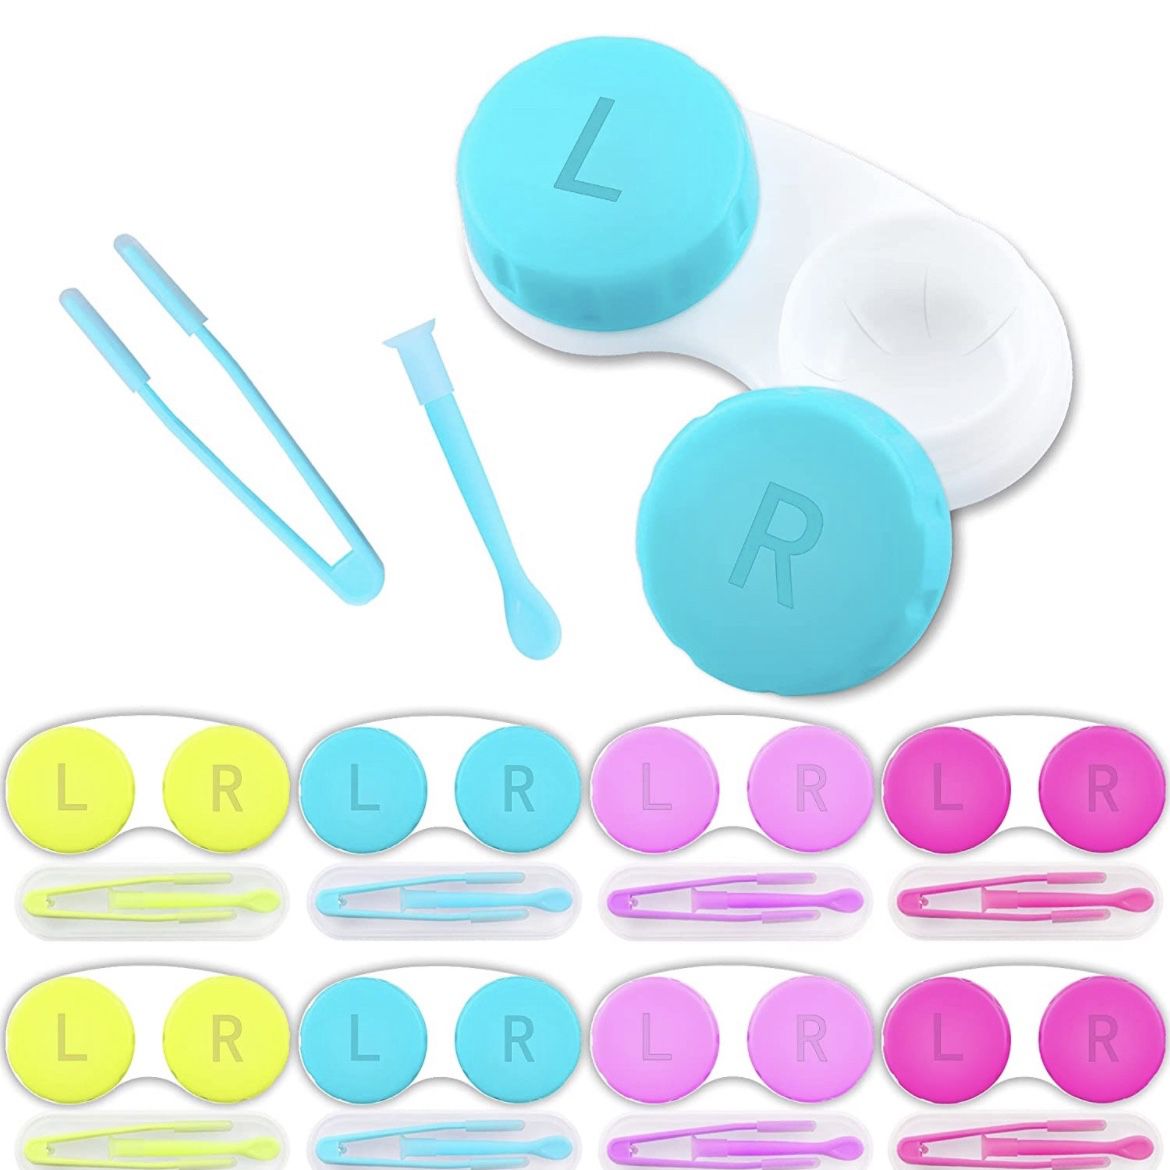  16 Pack Contact Lens Tools Kits, 8 Pack Contact Lens Case and 8 Pack Contact Lens Tweezers Inserter/Remover Colorful Box Soak Storage Leak Proof Comp